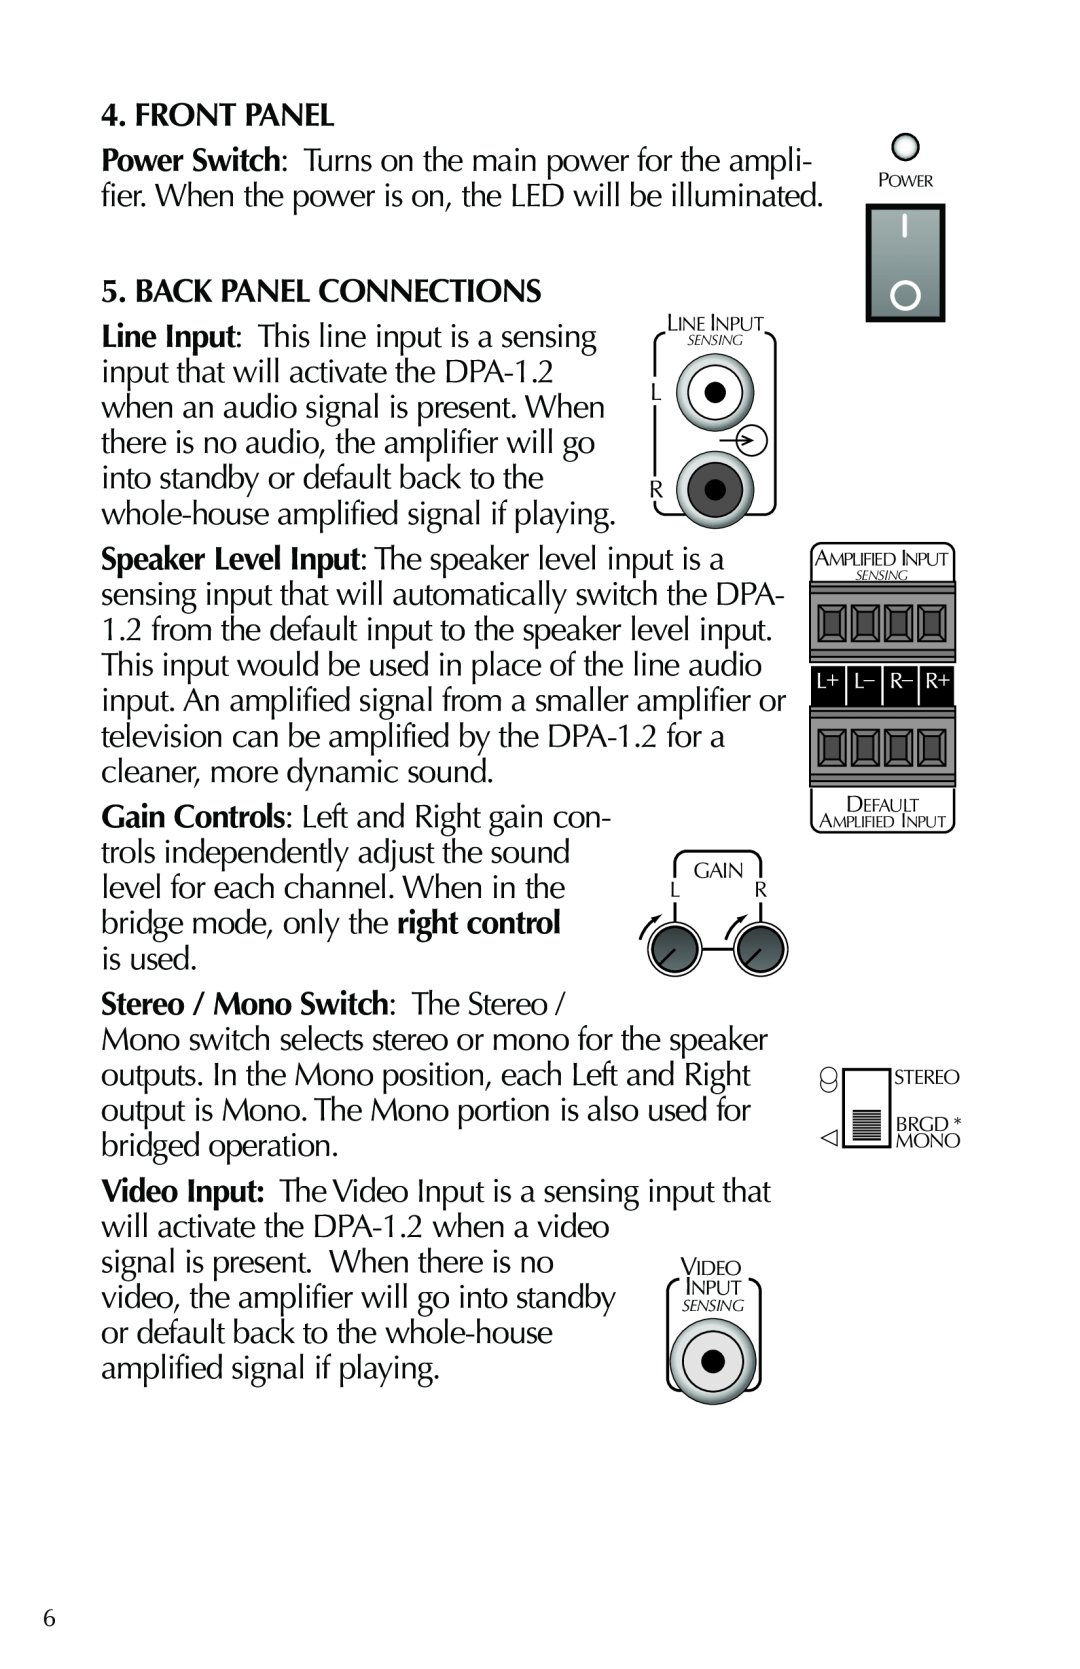 Russound DPA-1.2 instruction manual Front Panel, Back Panel Connections, Stereo / Mono Switch: The Stereo 